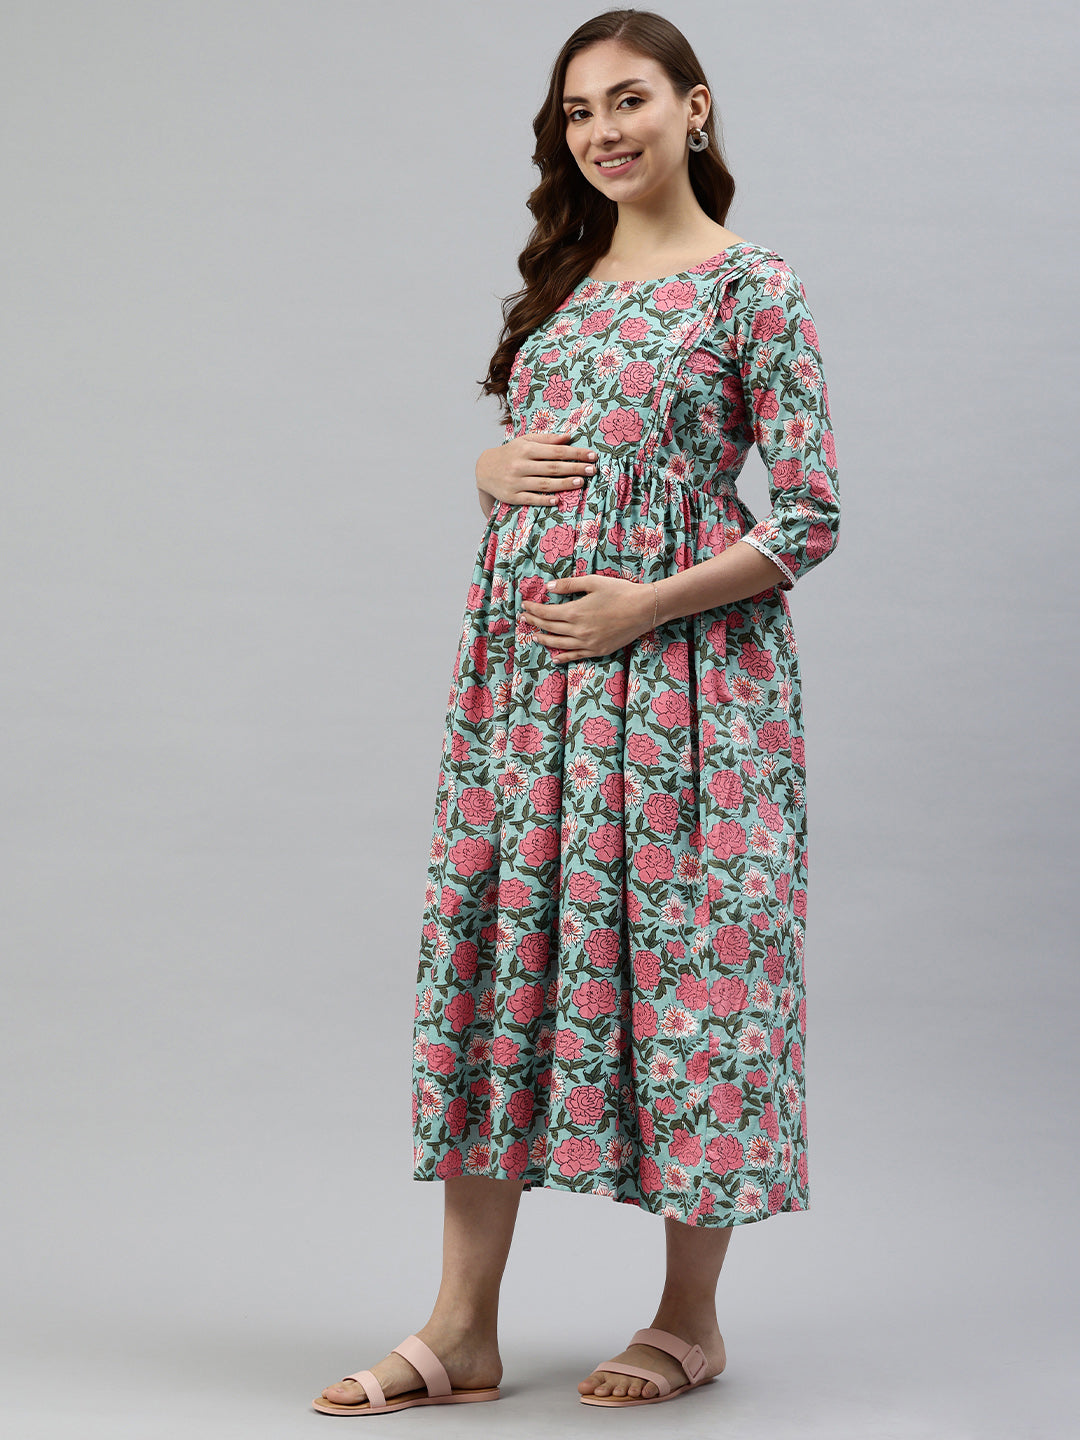 Blue and Pink Floral Print Maternity Fit & Flare Midi Dress